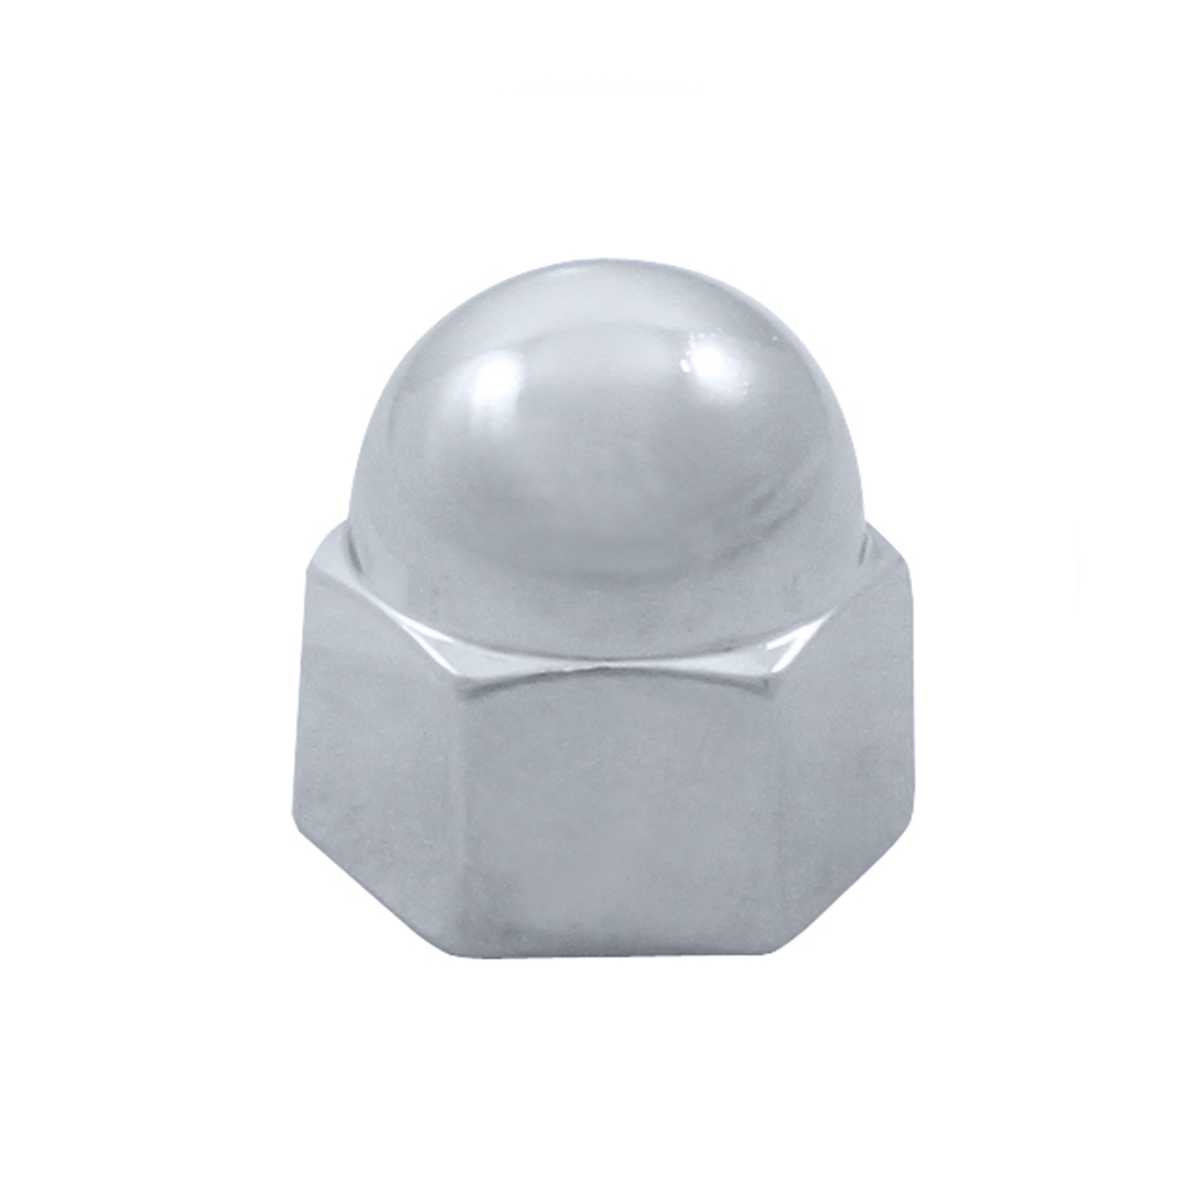 11/16 Inch x 7/8 Inch Acorn Die Cast Nut Cover - 50 Pack